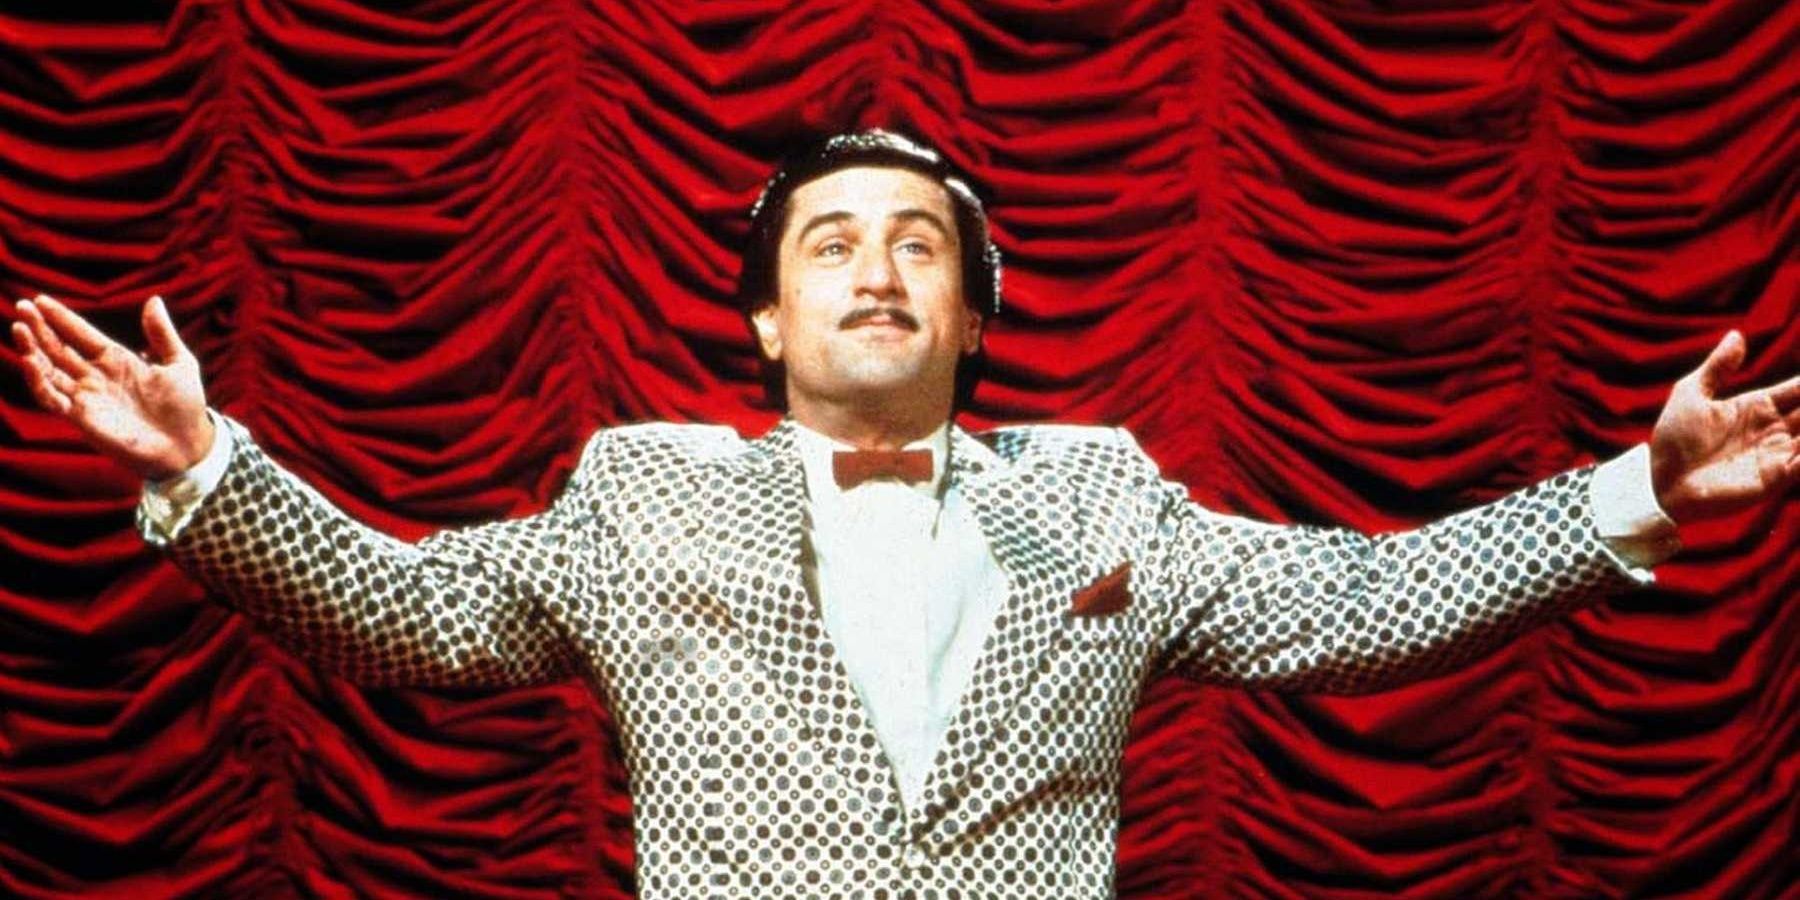 Robert DeNiro in The King Of Comedy, on stage receiving praise.